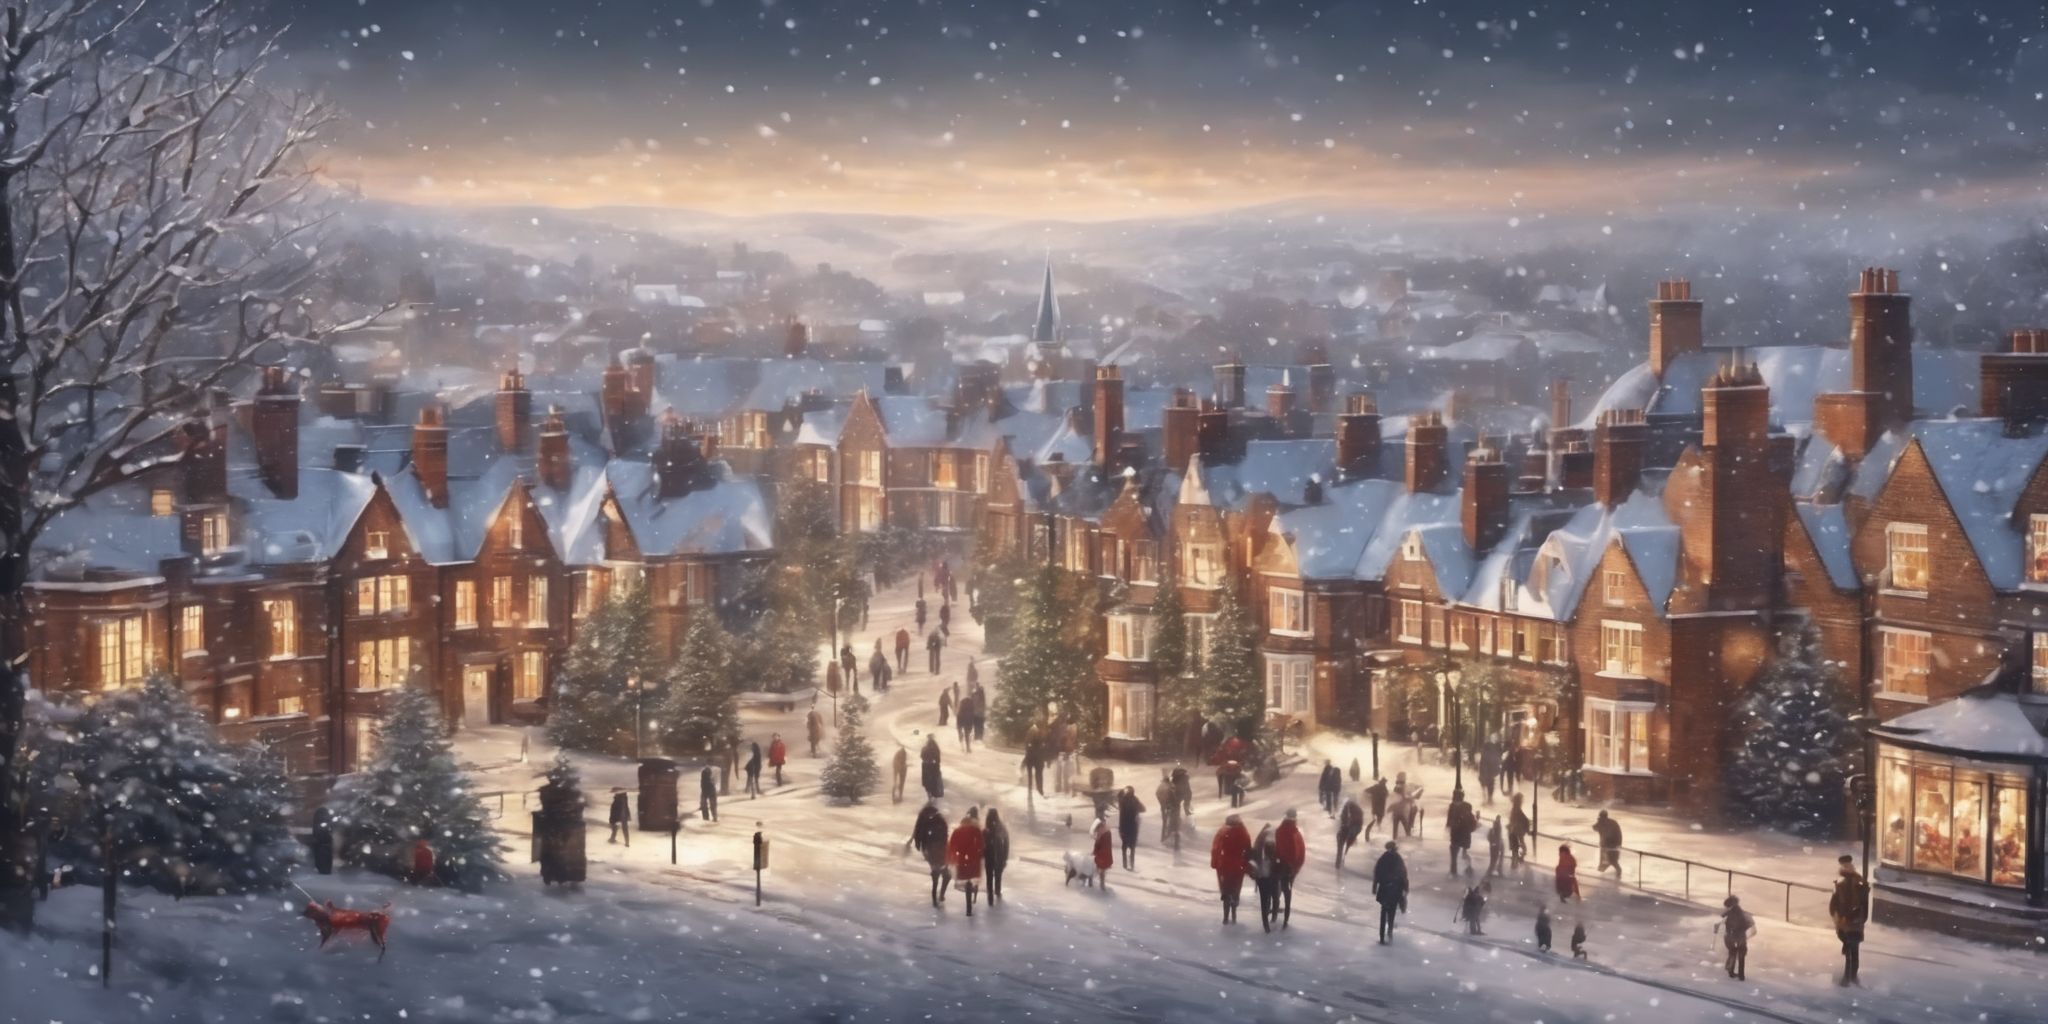 UK in realistic Christmas style